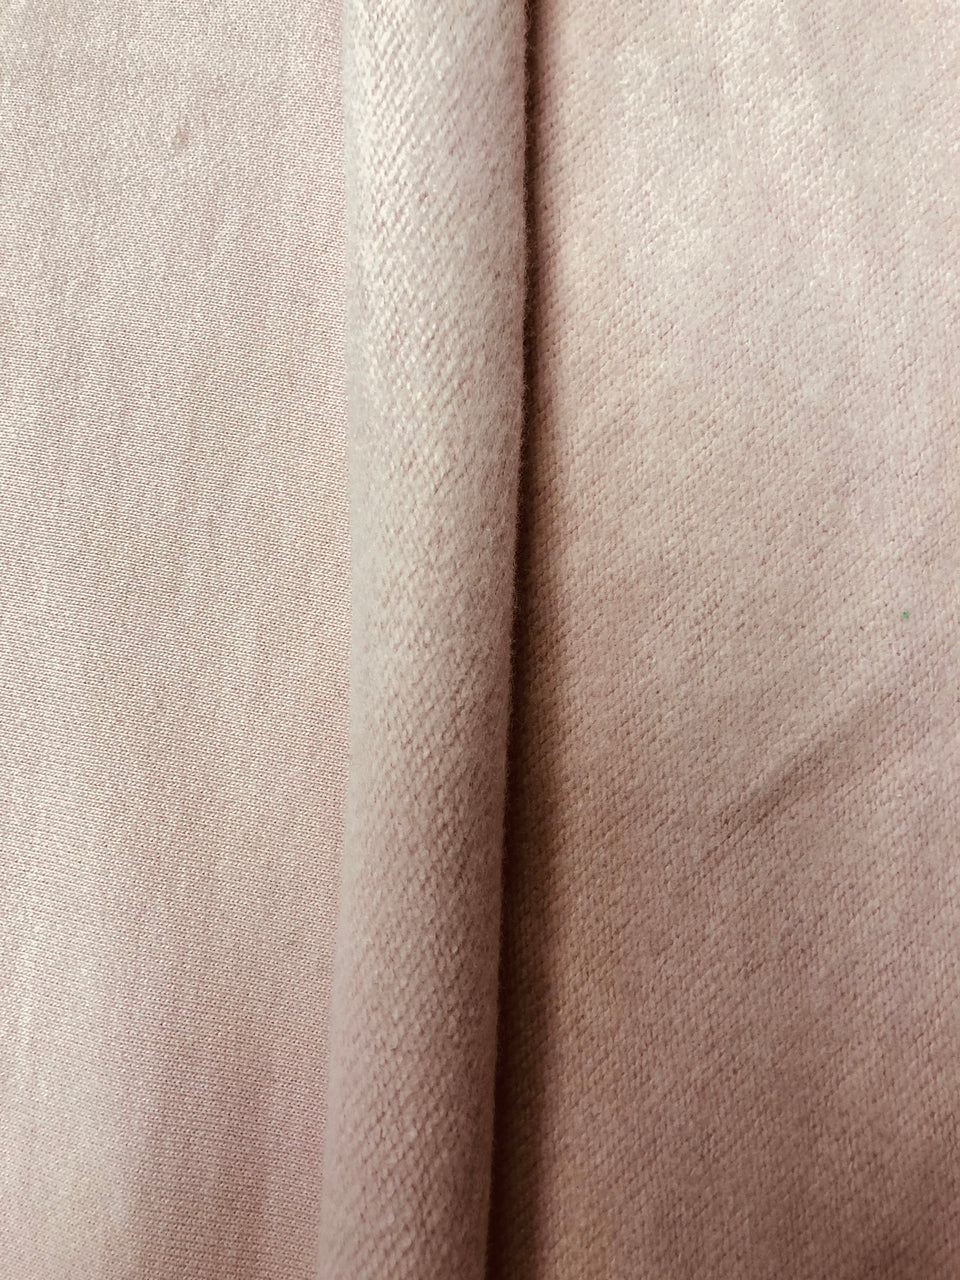 Taupe - French Fleece